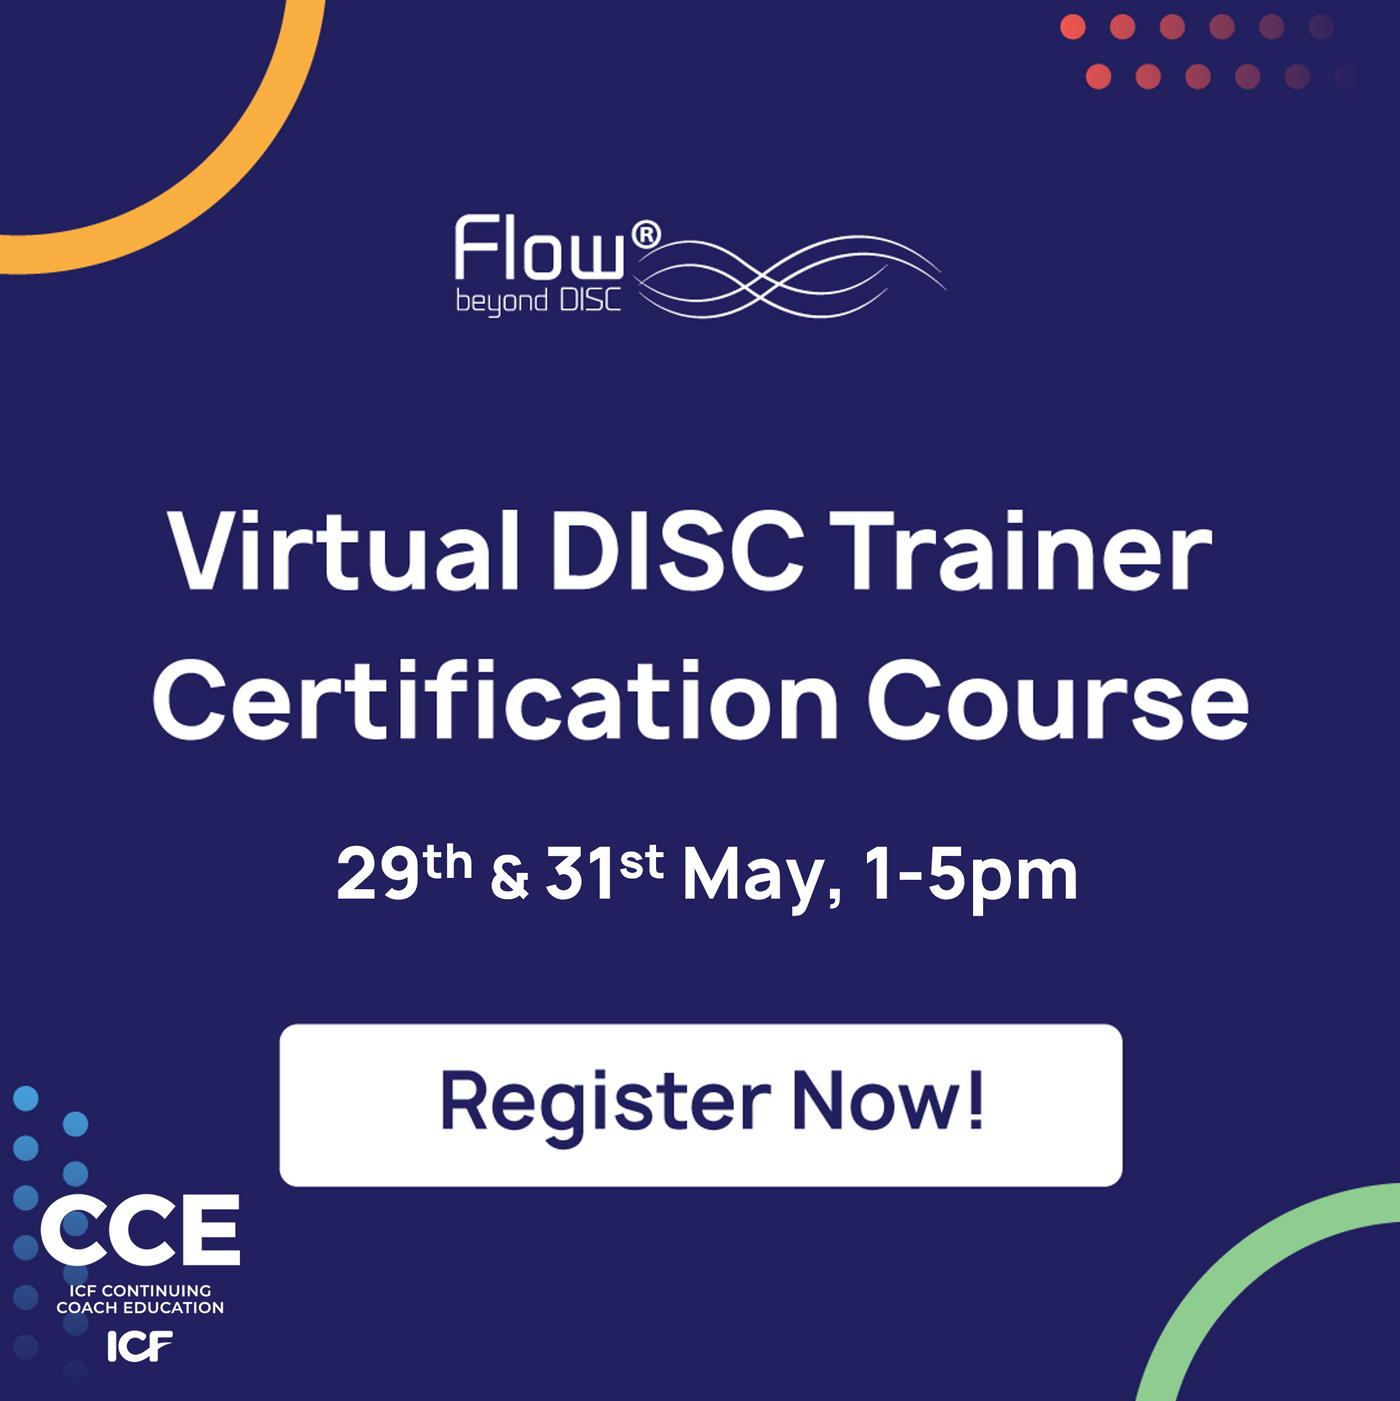 ONLINE Advanced Certification Course - receives ICF CCE points